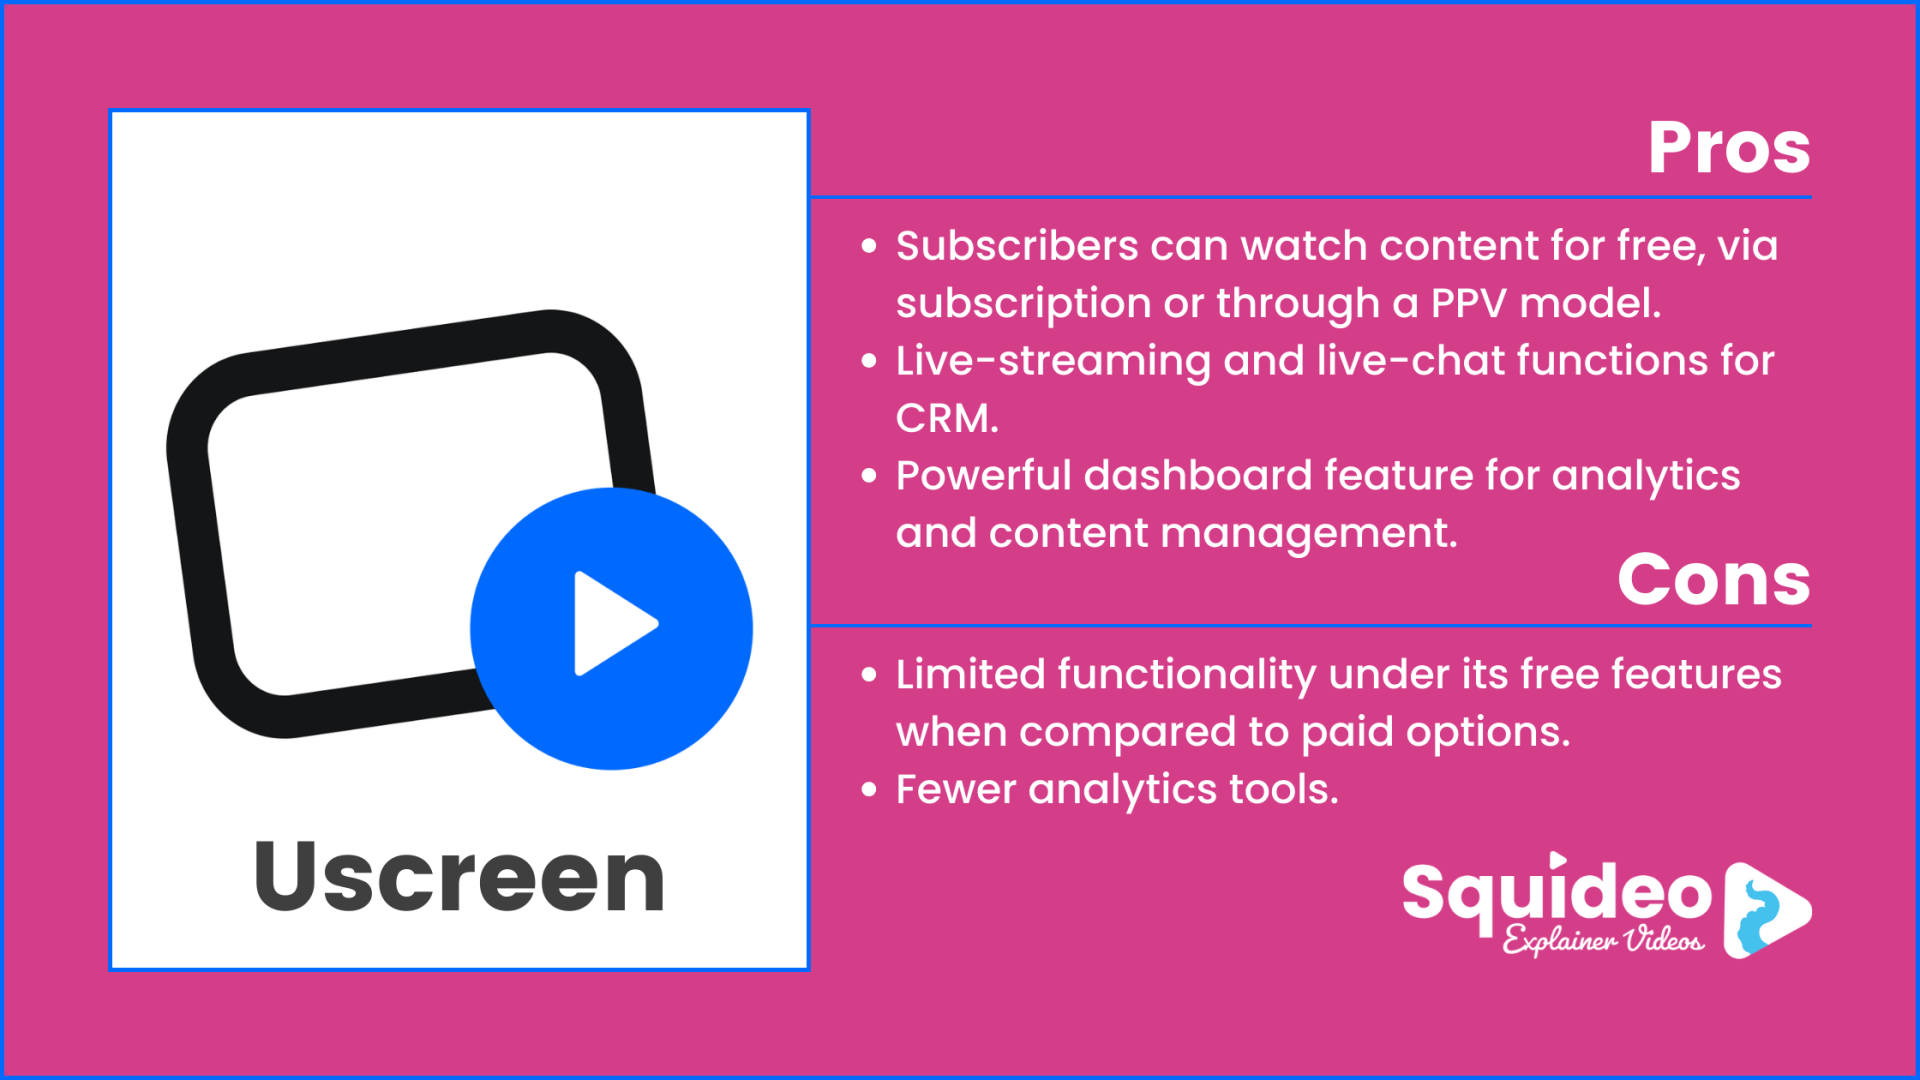 Uscreen Video Pros and Cons